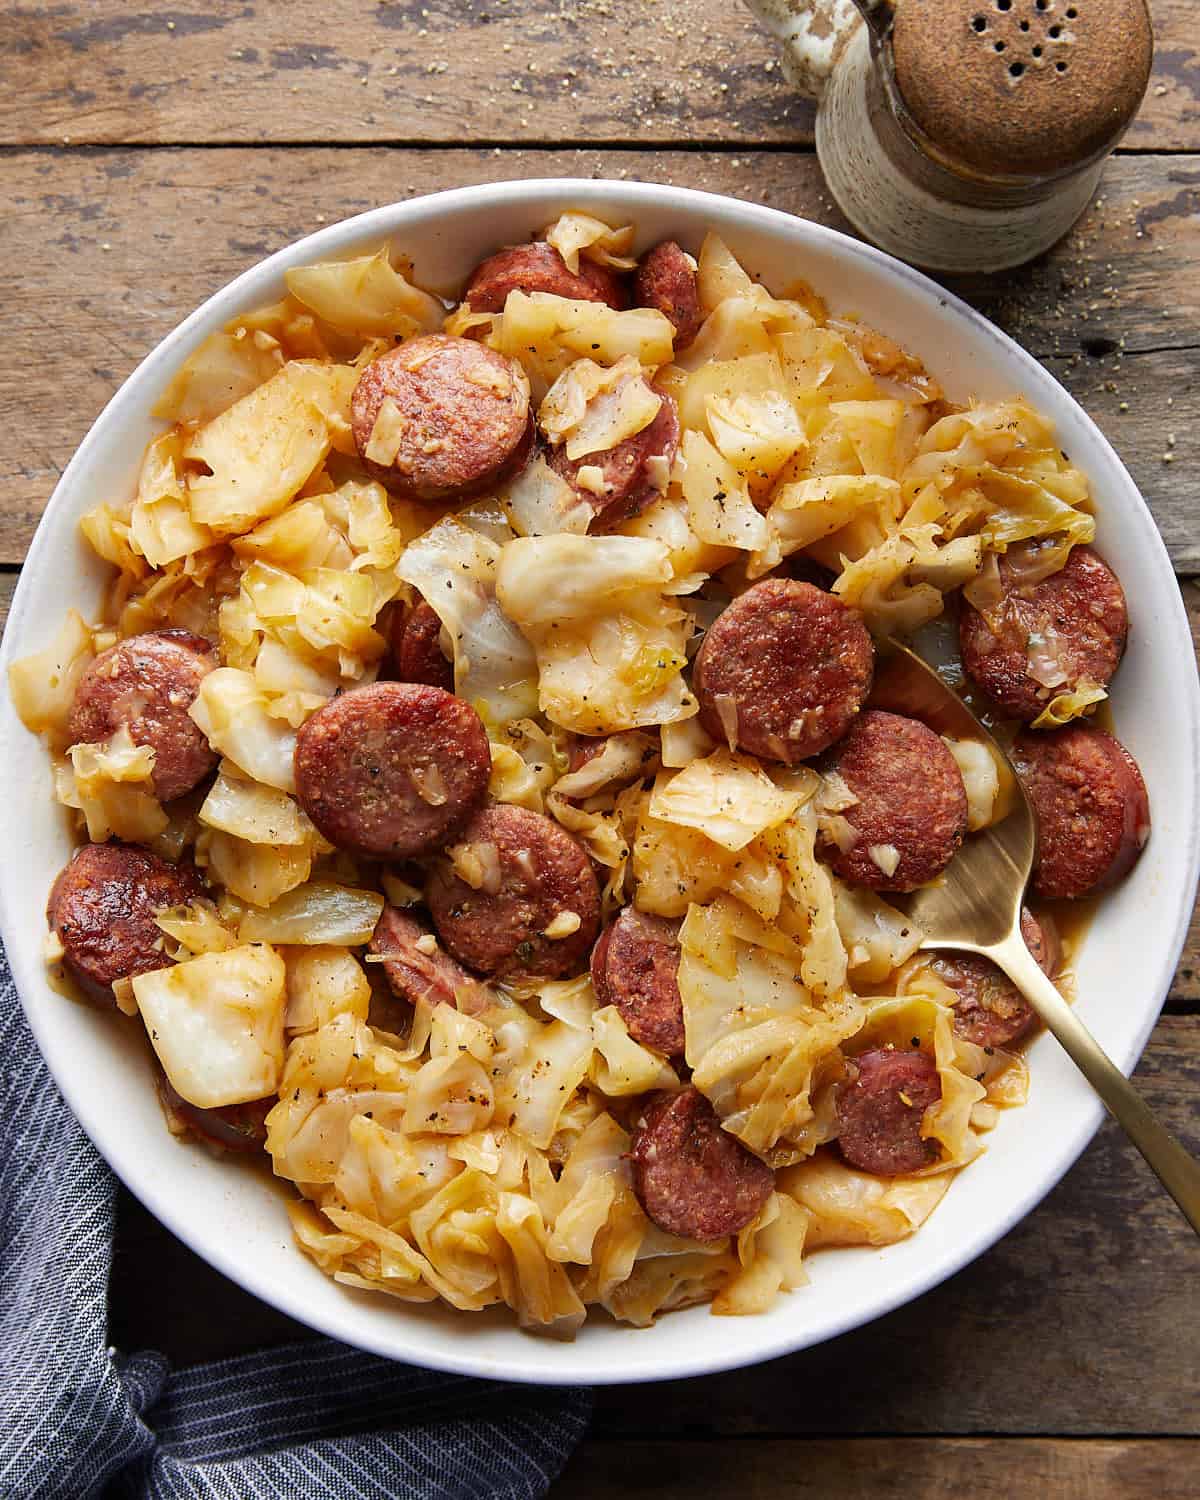 Overhead image of smoked sausage and cabbage in white dish.